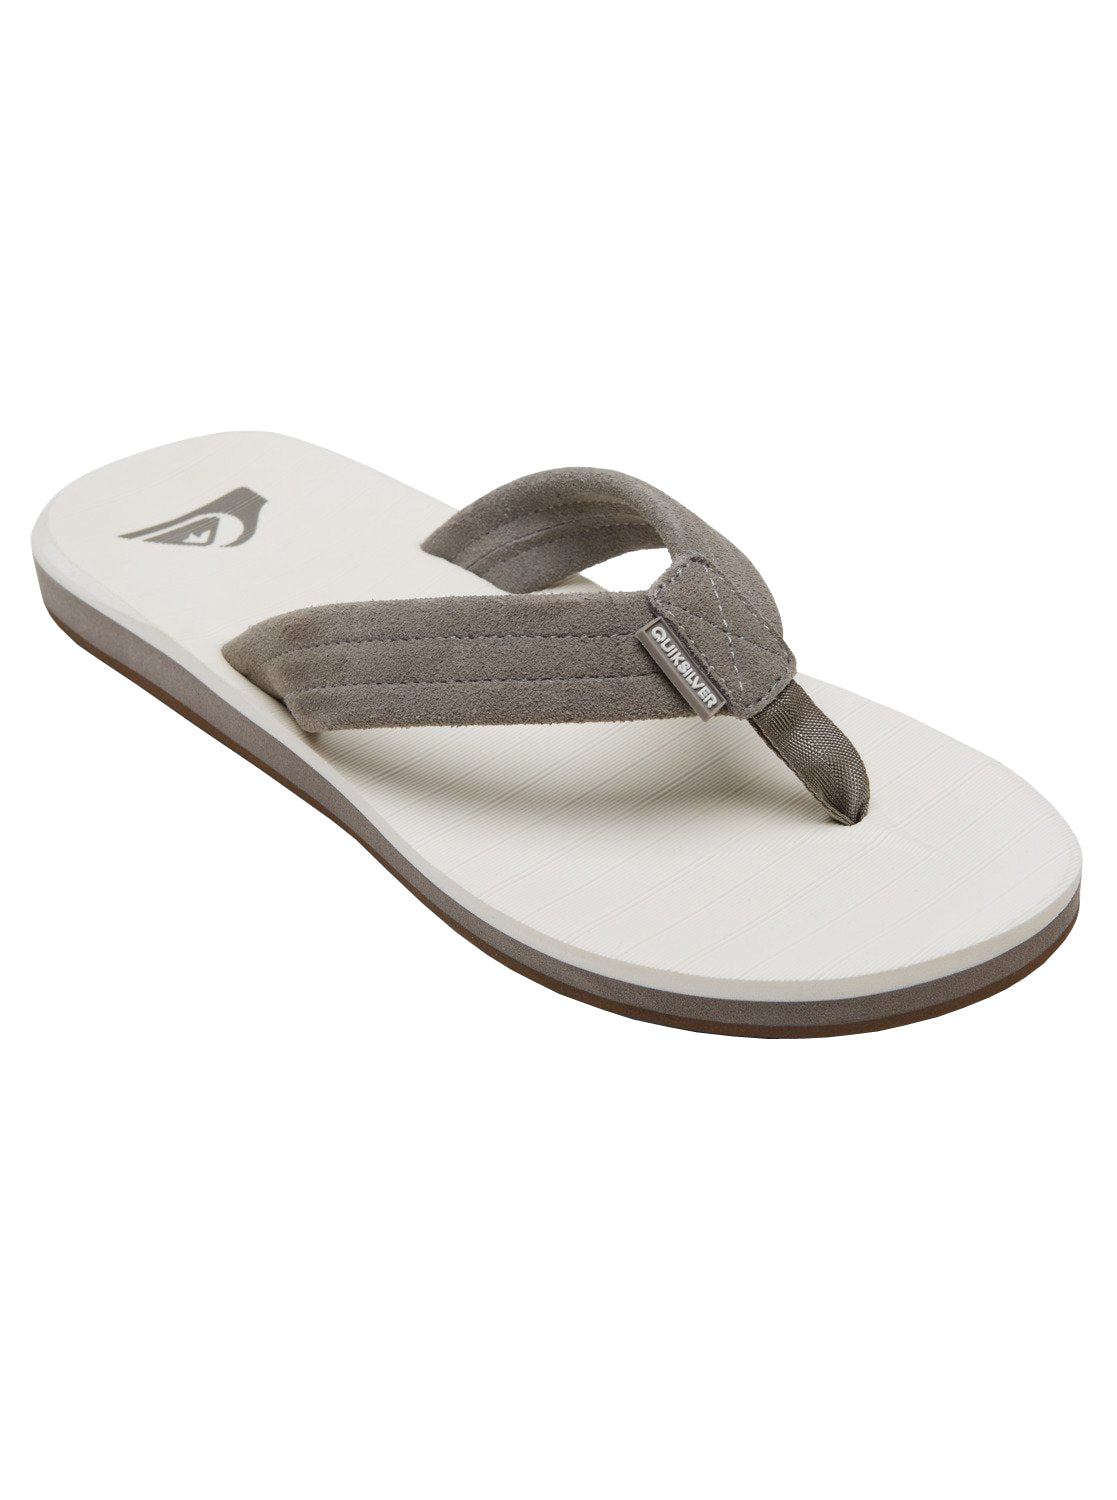 Quiksilver Carver Suede Mens Sandal XSWS-Grey-White-Grey 14